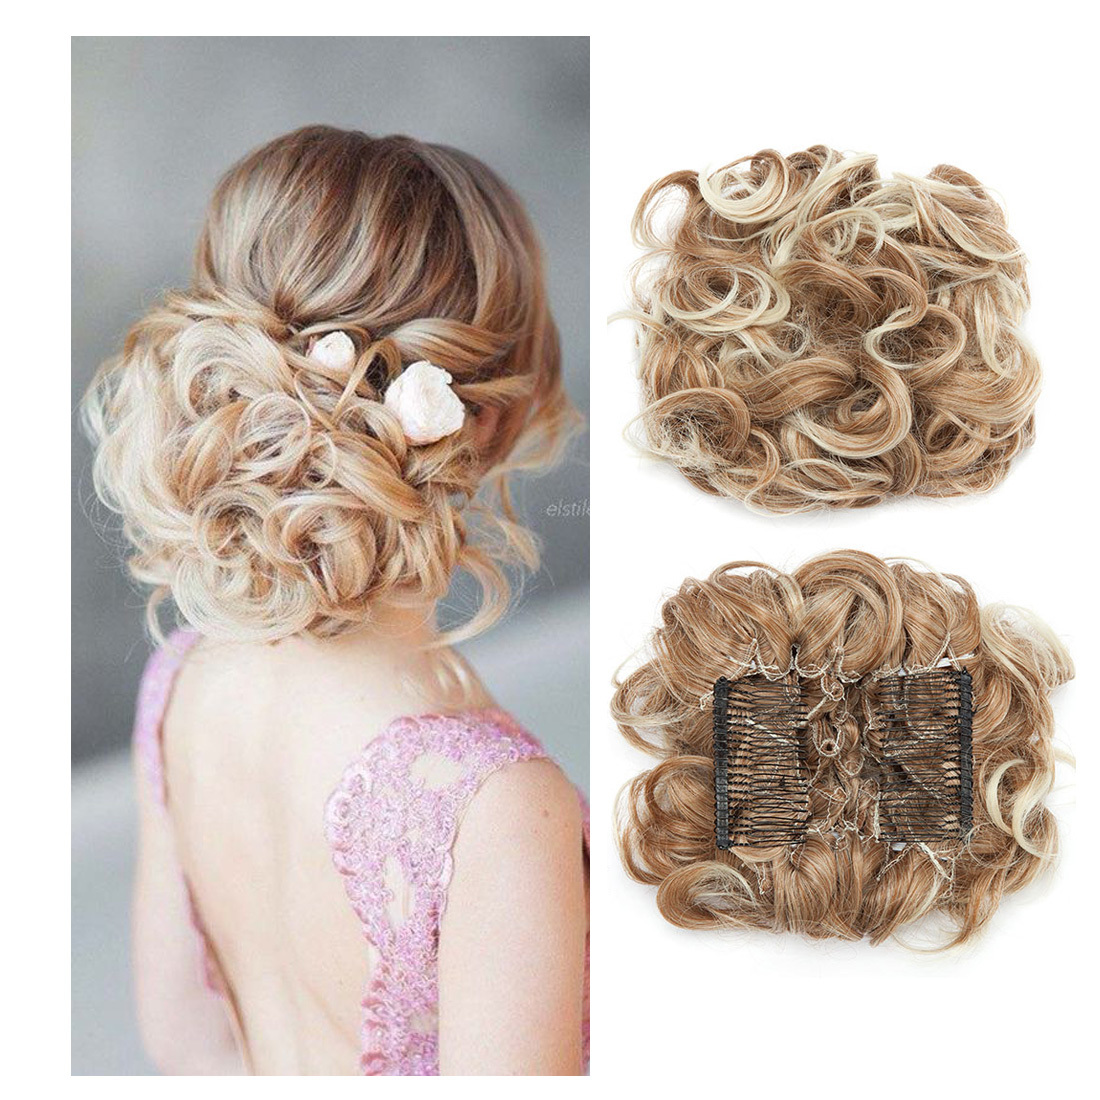 Fluffy Buns Hairpieces Chignon Curly Updo Sunthetic Wigs for Women Color 30t613 - $12.99